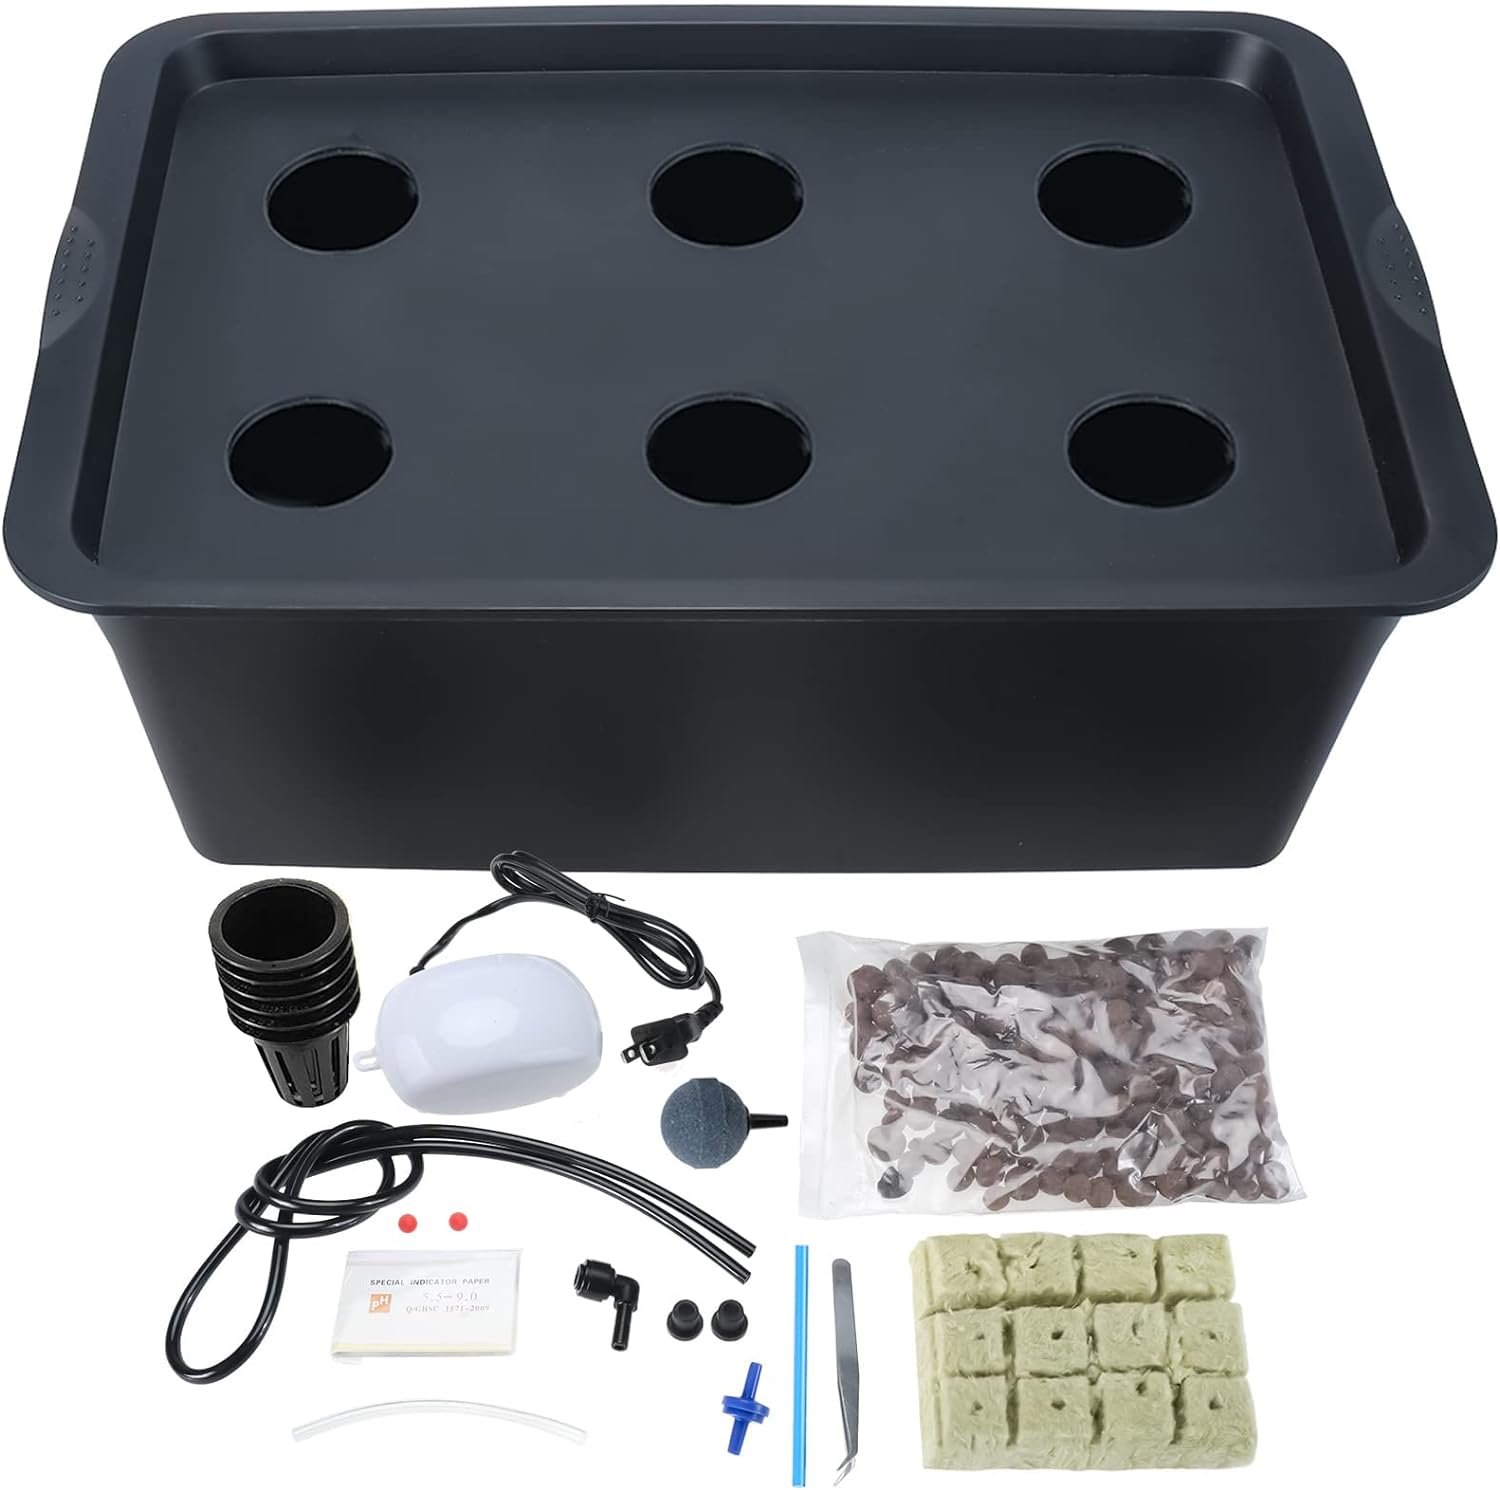 HighFree Hydroponic System Growing Kit for Plants Herb Garden Starter Set 6 Sites DIY Self Watering Indoor Hydroponics Tools with Large Bubble Stone Rockwool Bucket Air Pump (6 Sites - Black)